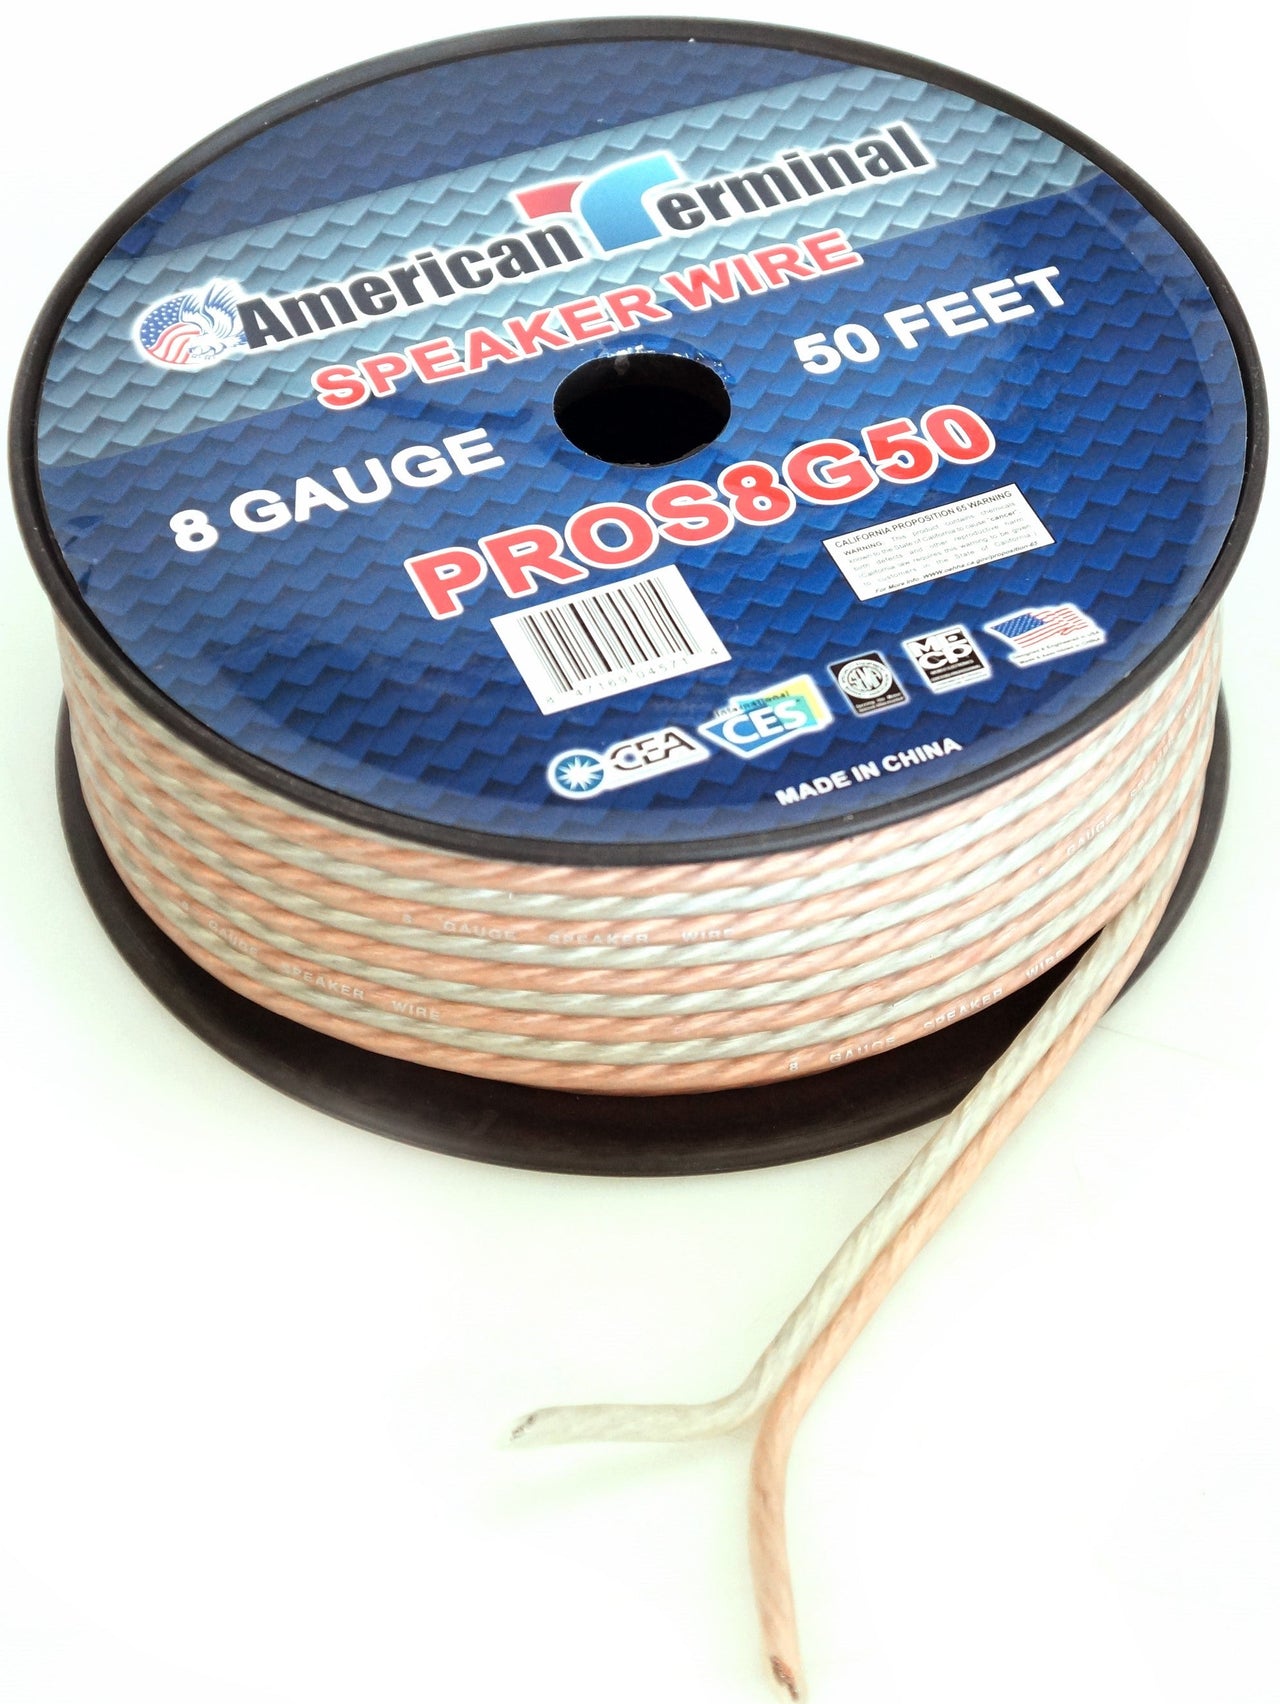 2 American Terminal PROS8G50 50' 8 Gauge PRO PA DJ Car Home Marine Audio Speaker Wire Cable Spool